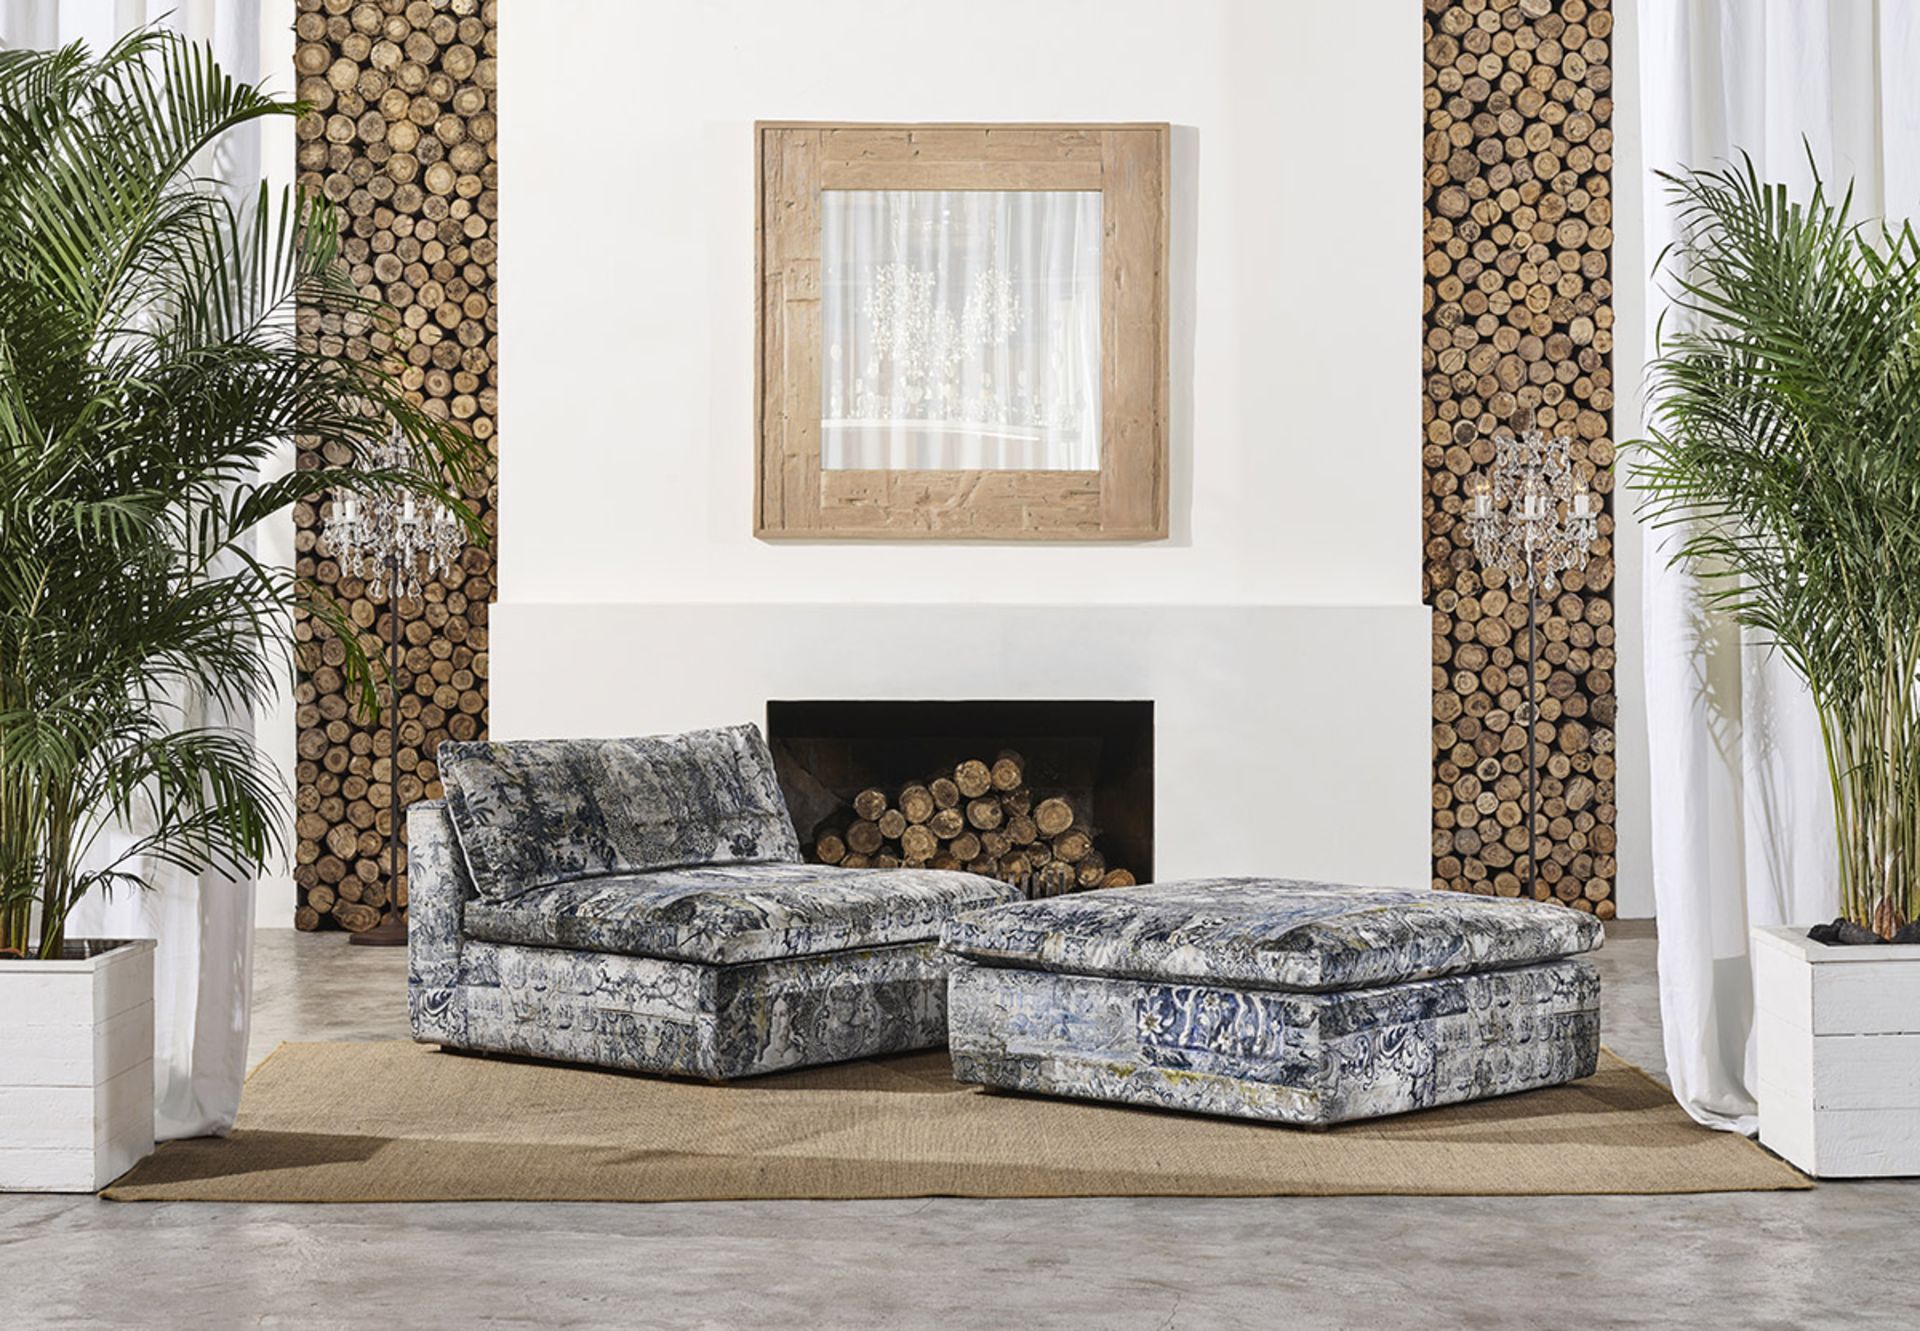 Bloom Sectional Sofa Luxury Velvet Finished In Vivid Velvet Emperors Clothes - The Bloom Is A - Image 2 of 3